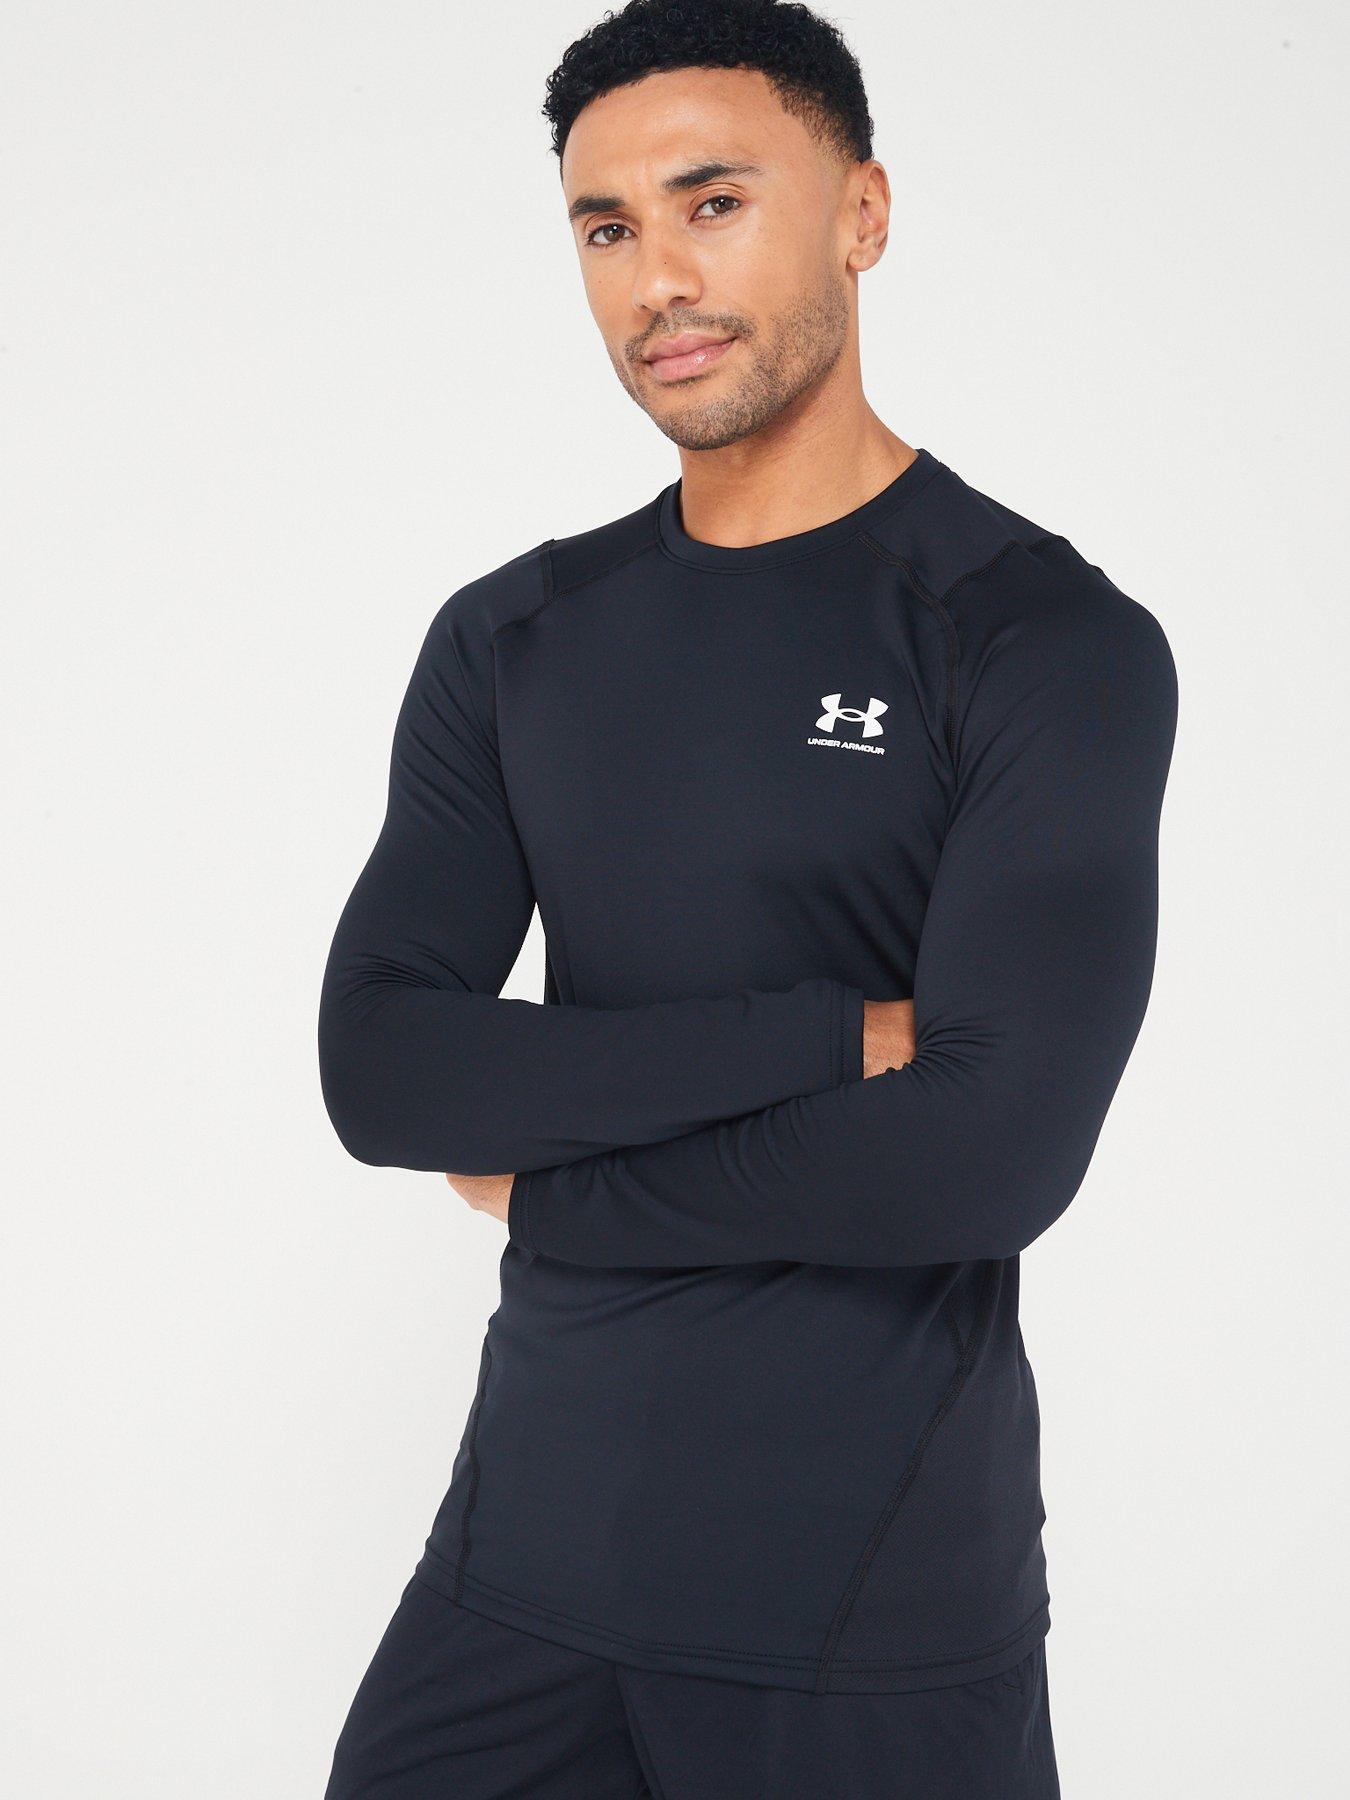 UNDER ARMOUR Mens Training Cold Gear Armour Fitted L/S T-Shirt